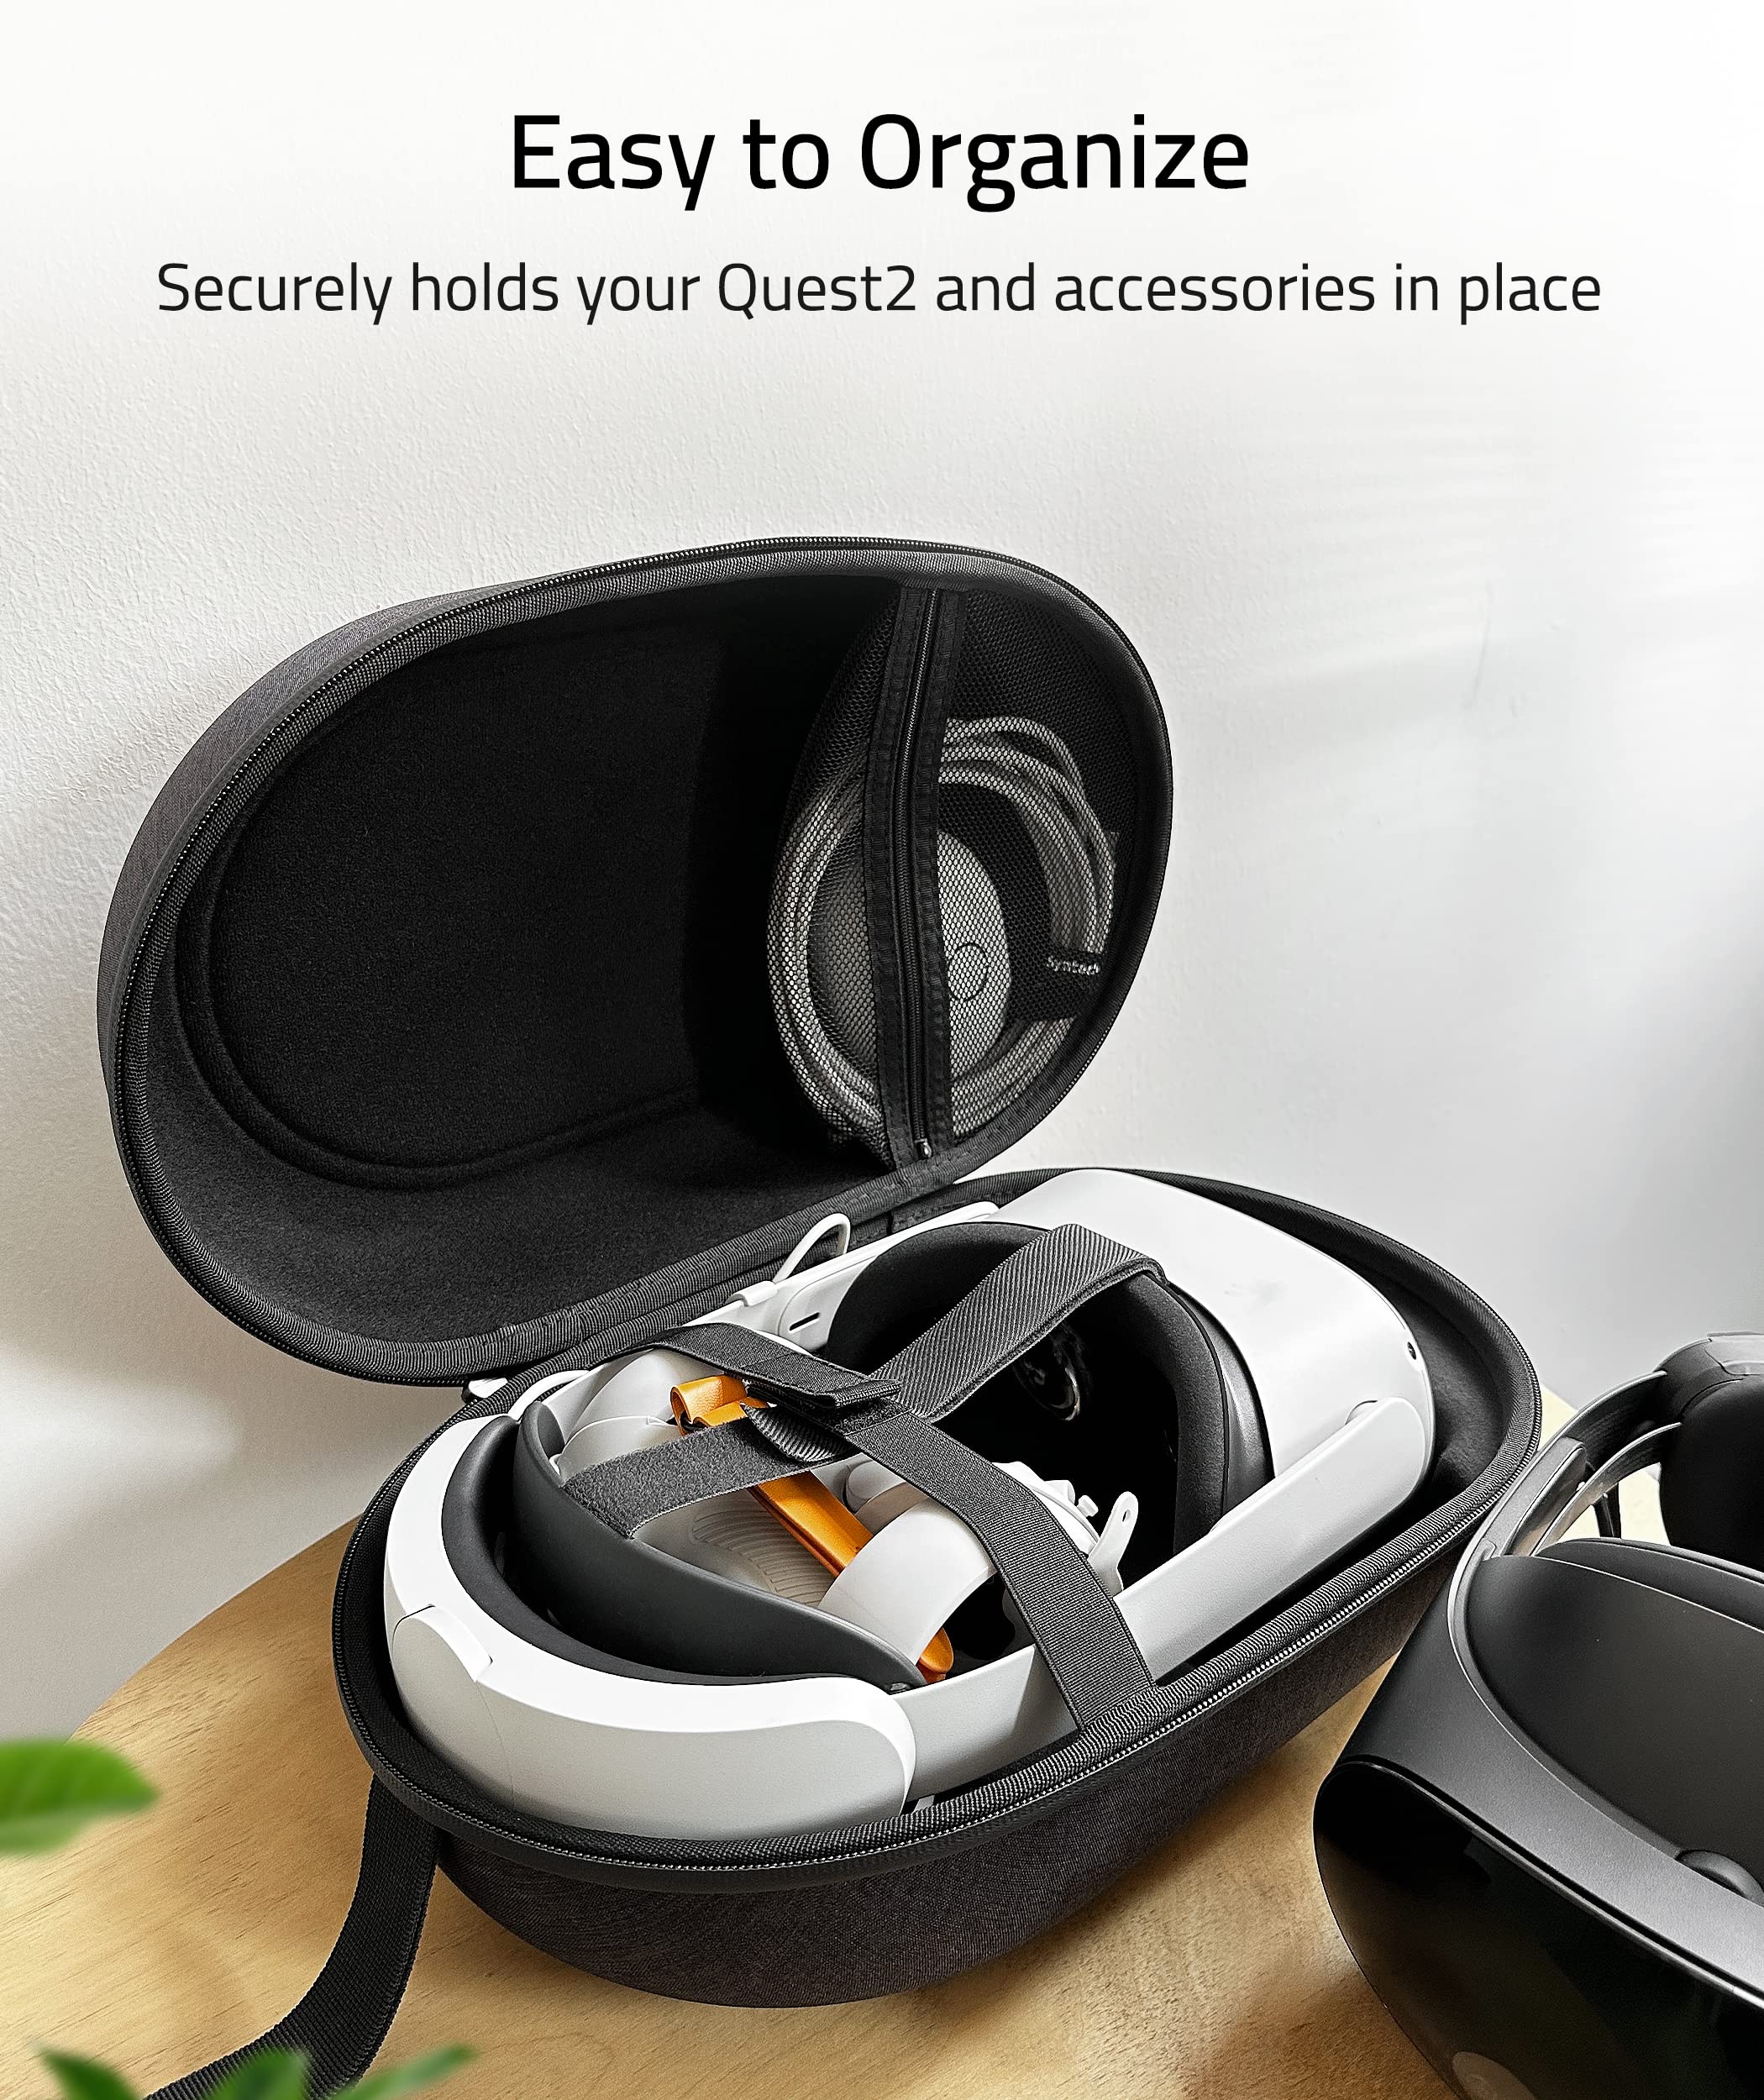 Hard Carrying Case for VR Headset